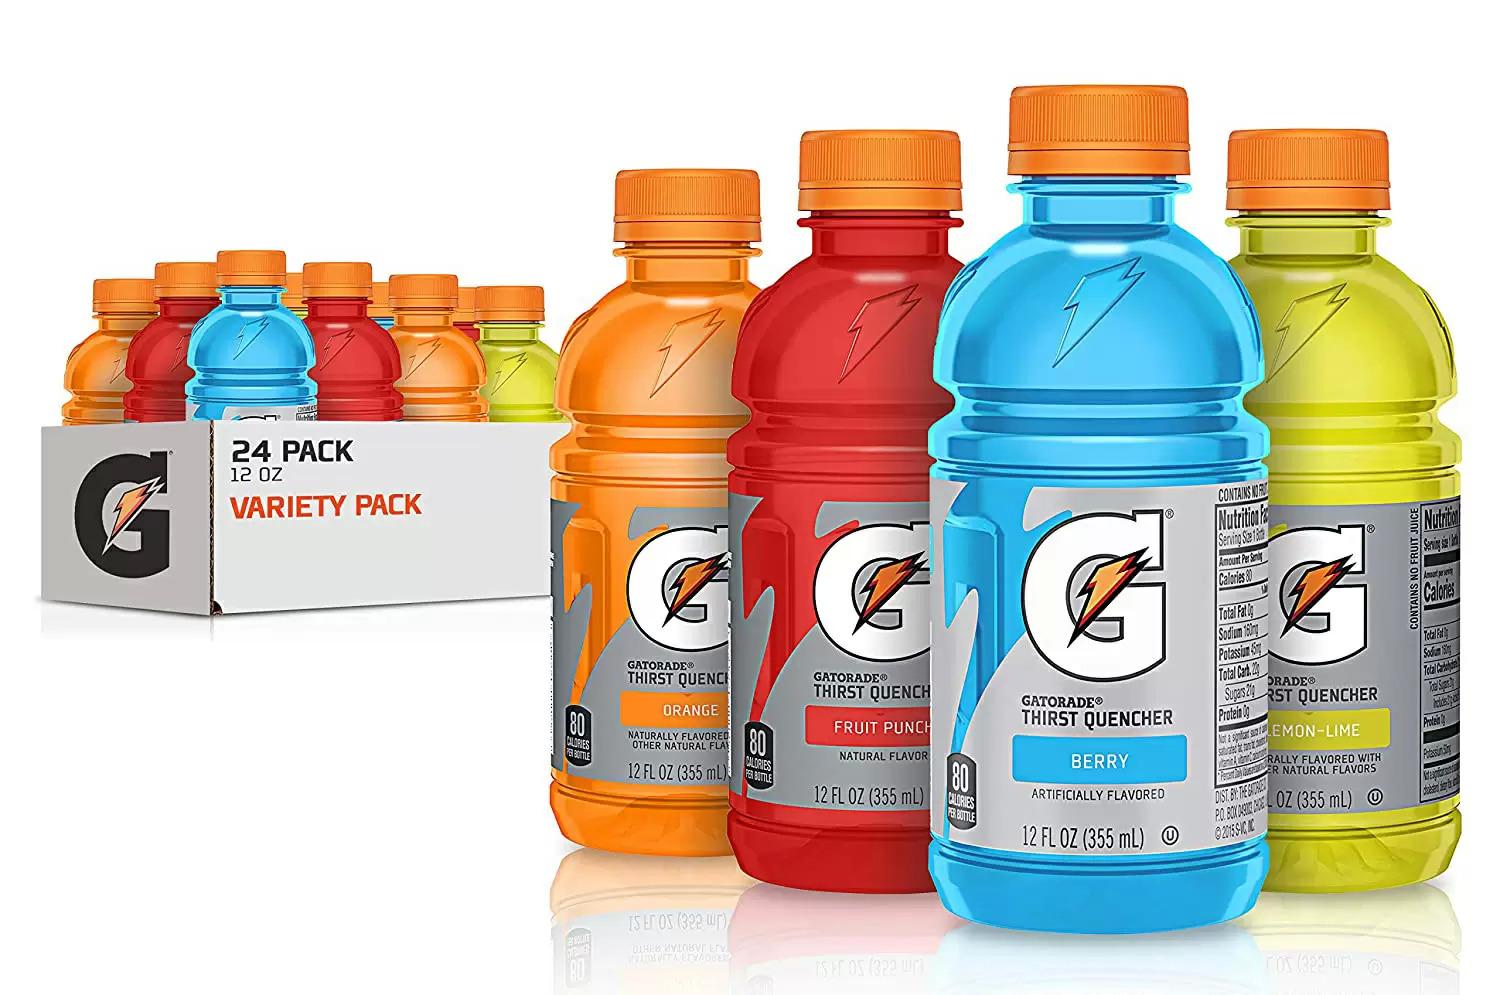 Gatorade Classic Thirst Quencher 24 Pack for $12.20 Shipped